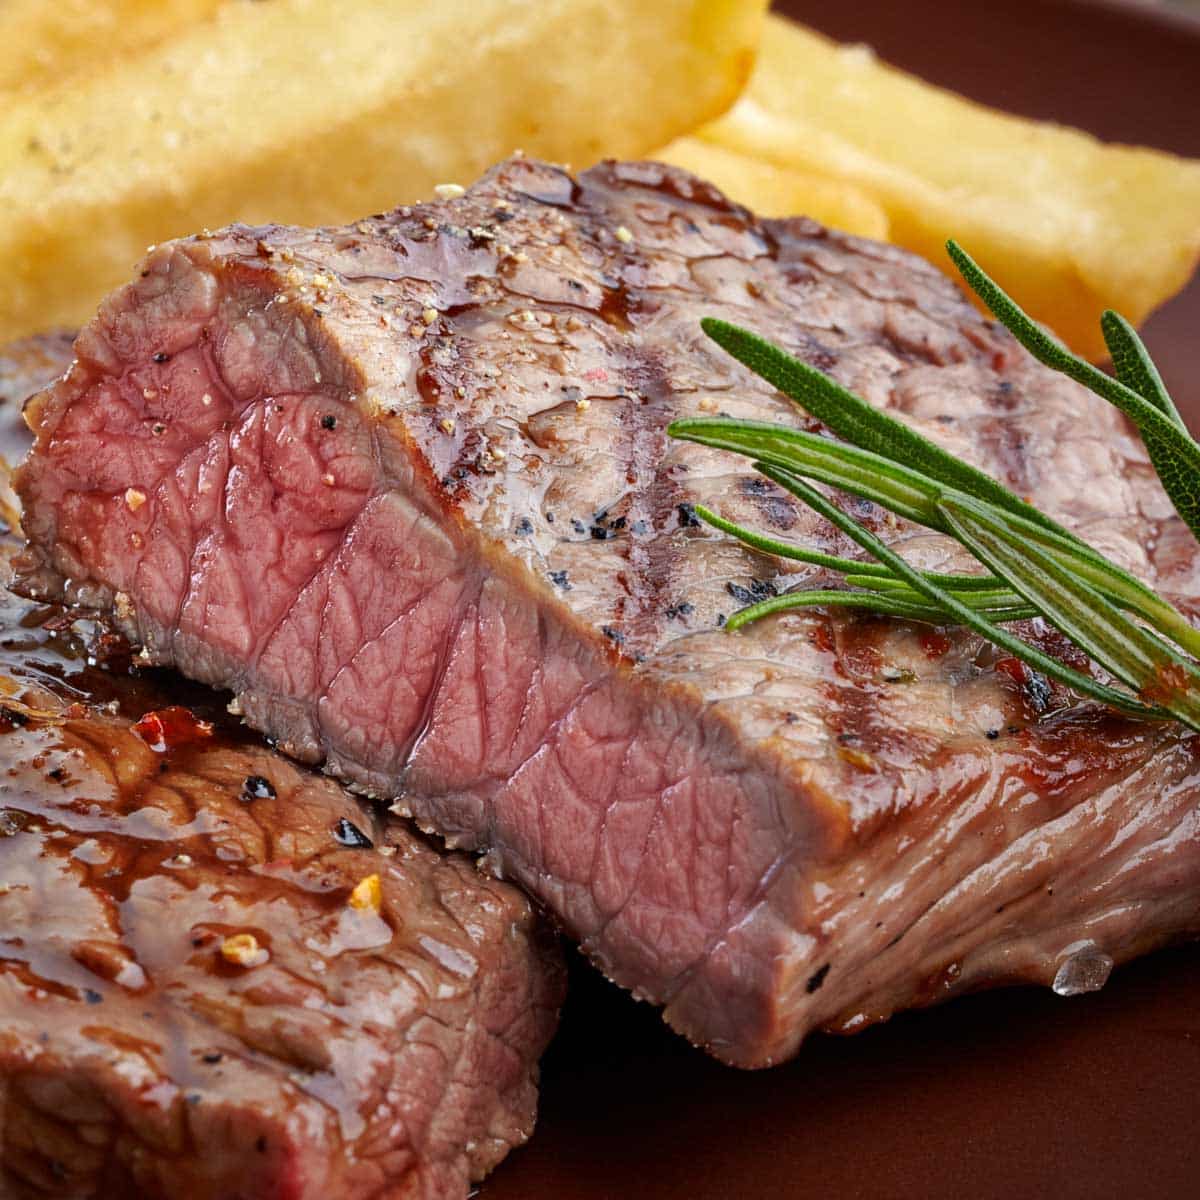 A closeup is shown of a grilled steak sliced in half with a sprig of rosemary and fries in the background.